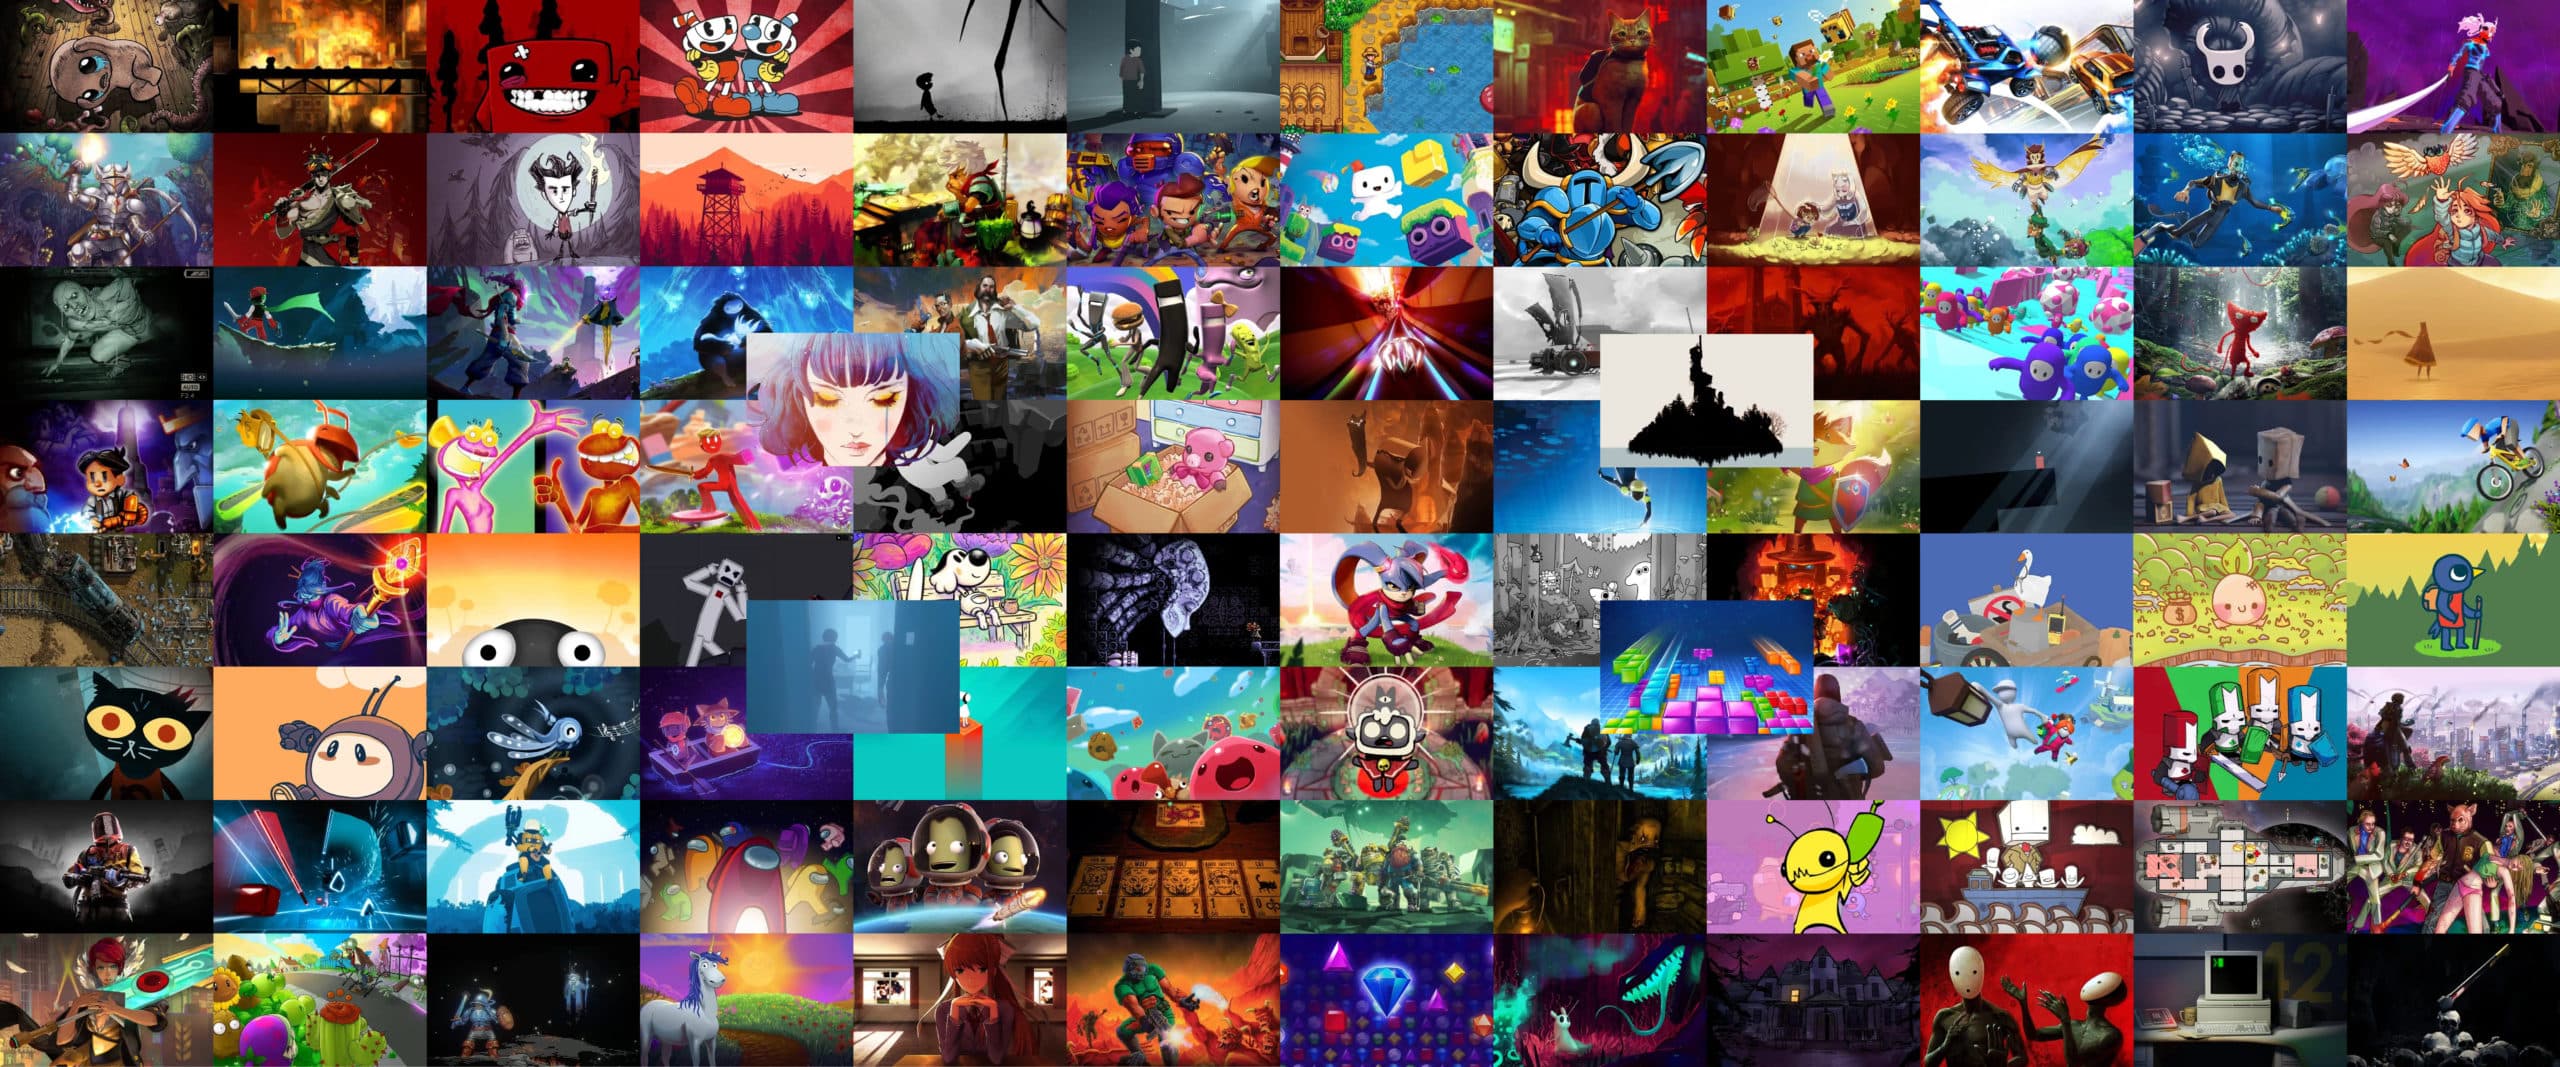 The 100 Best Indie Games of All Time - The Indie Game Website